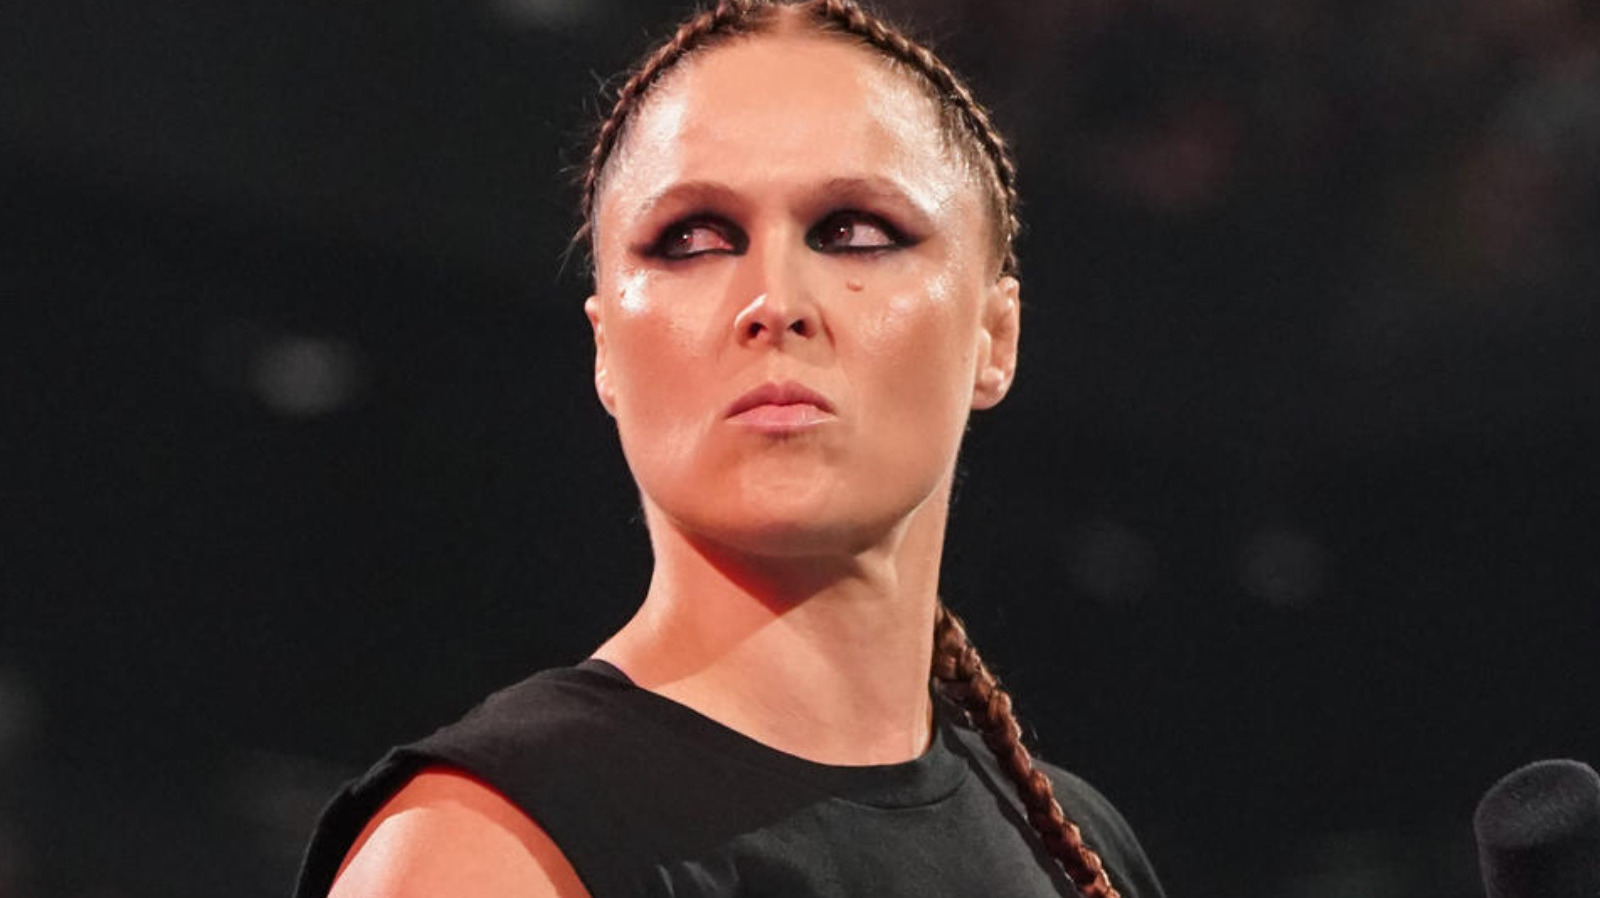 WWE Star Ronda Rousey Set To Write A New Book